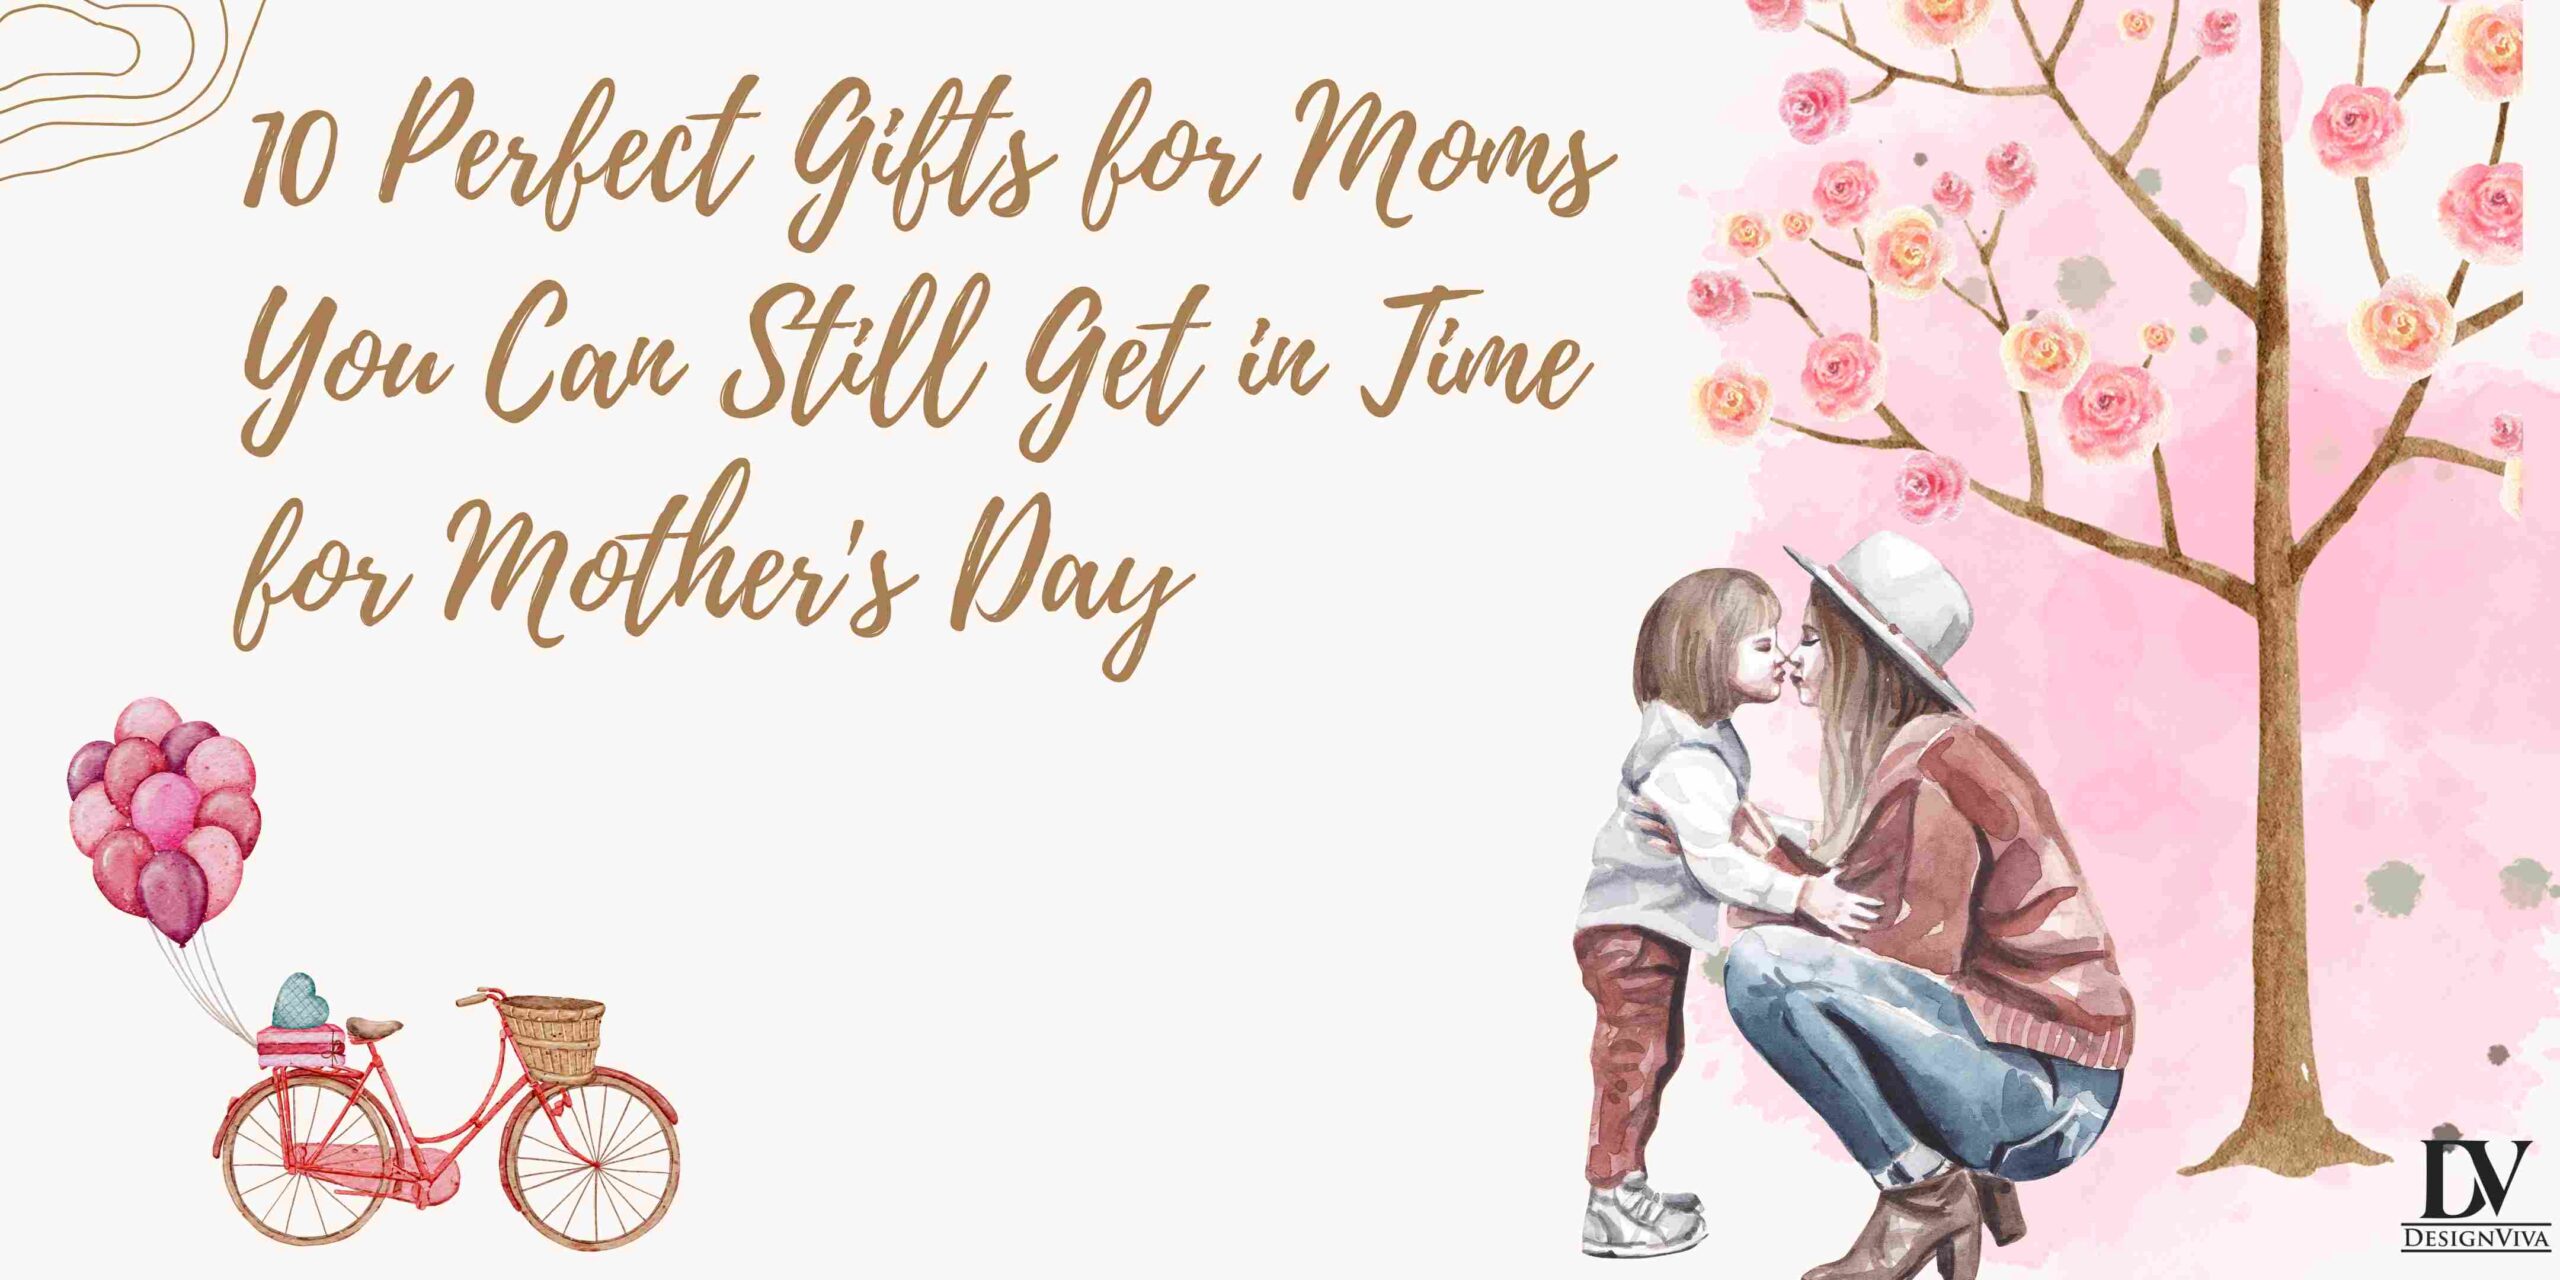 10 Perfect Gifts for Moms You Can Still Get in Time for Mother’s Day